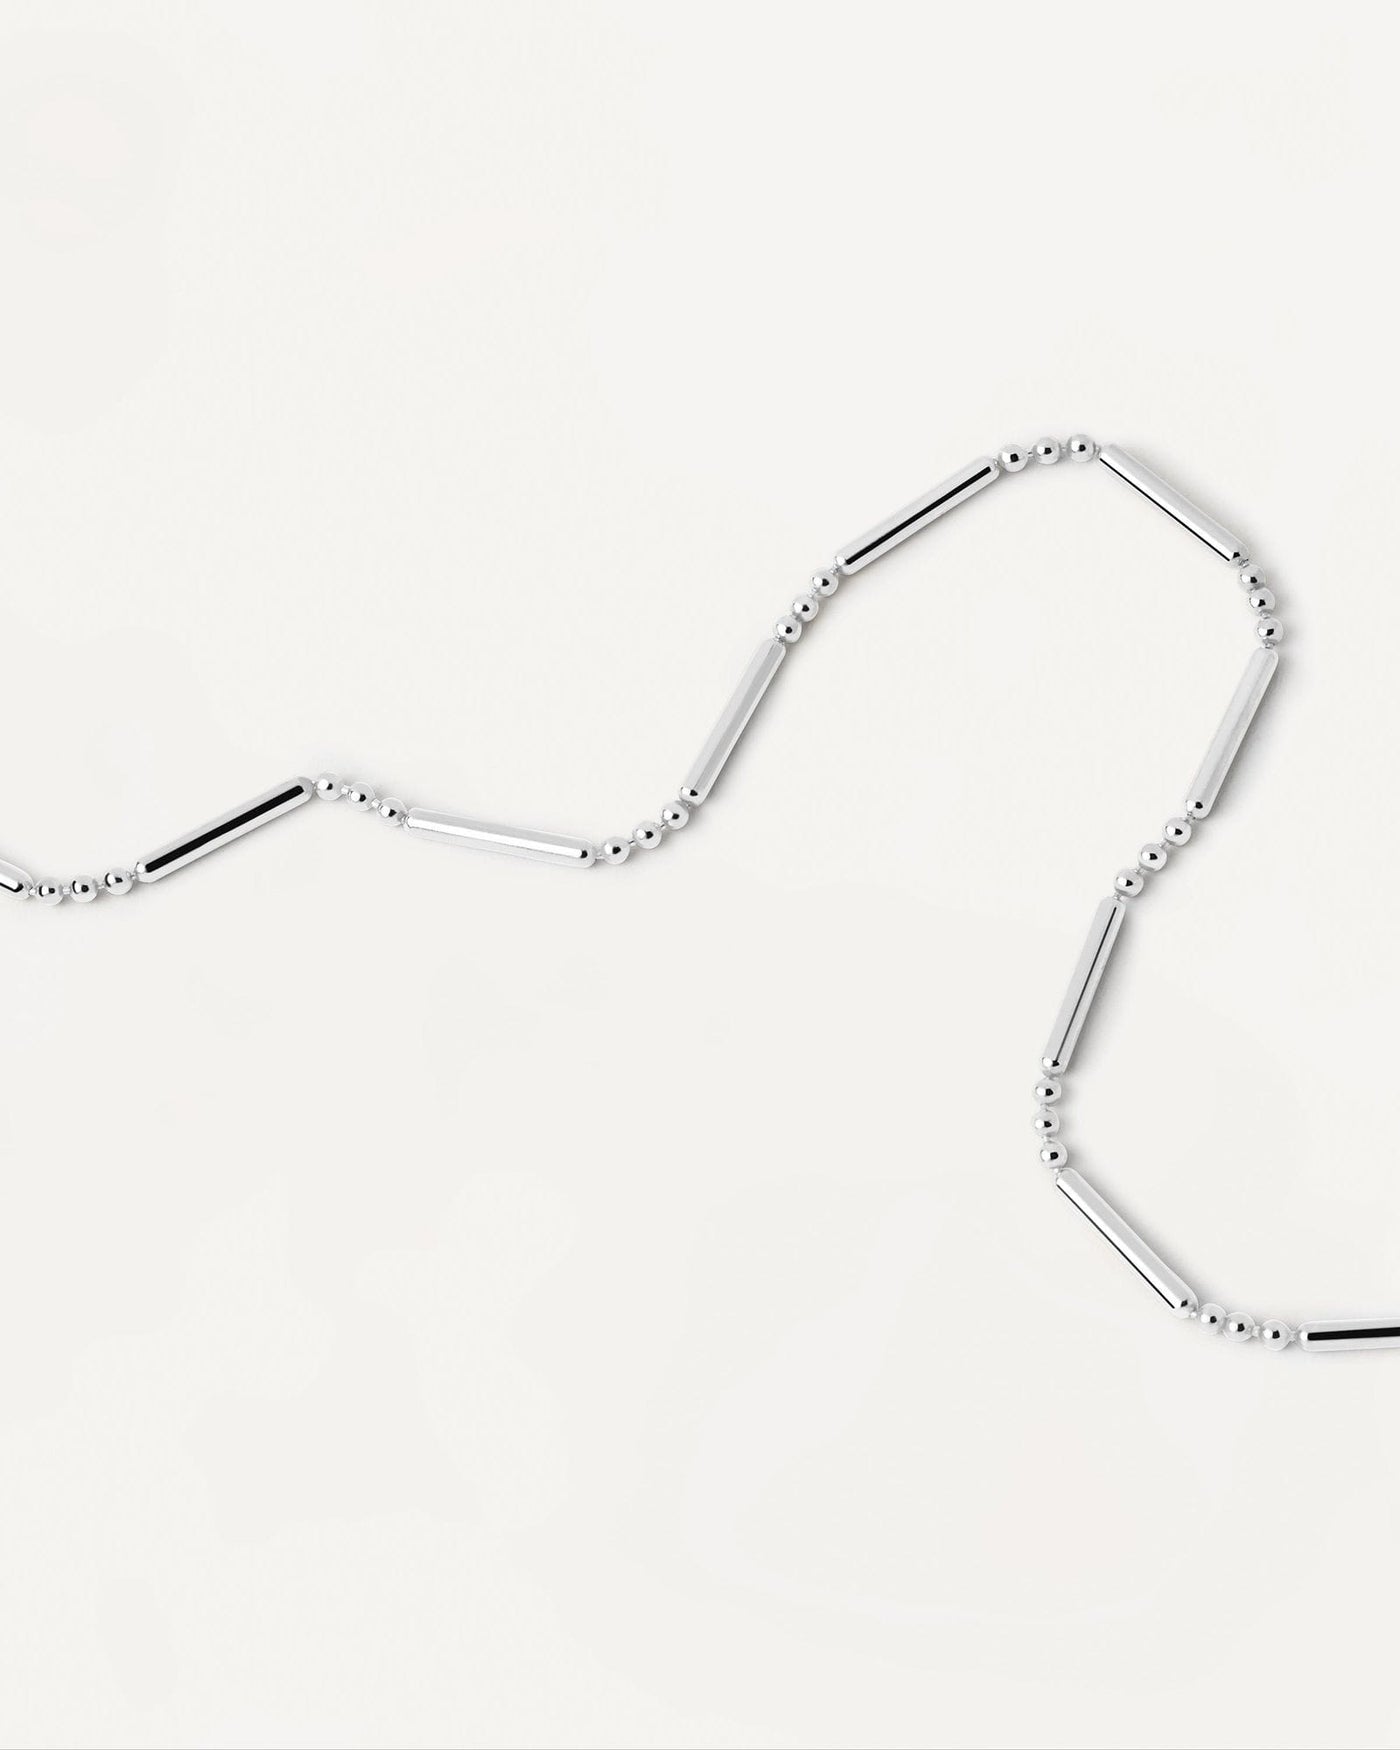 2024 Selection | Valeria Silver Necklace. Ball and bar textured necklace in sterling silver. Get the latest arrival from PDPAOLA. Place your order safely and get this Best Seller. Free Shipping.